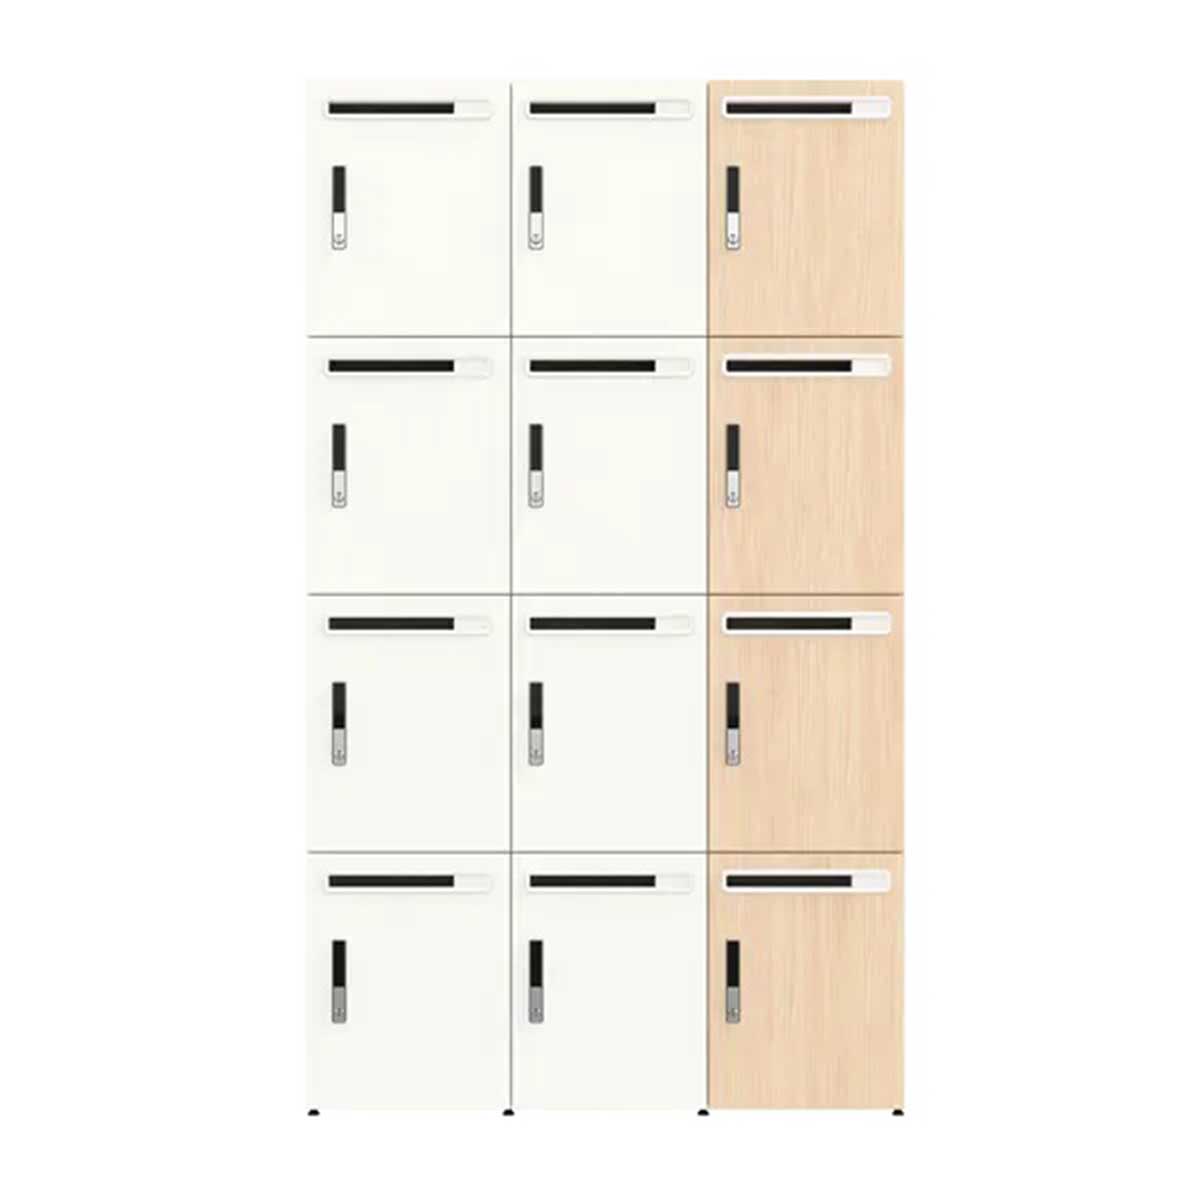 Electronics Locker Safe Manufacturers, Suppliers in Rohini Sector 10